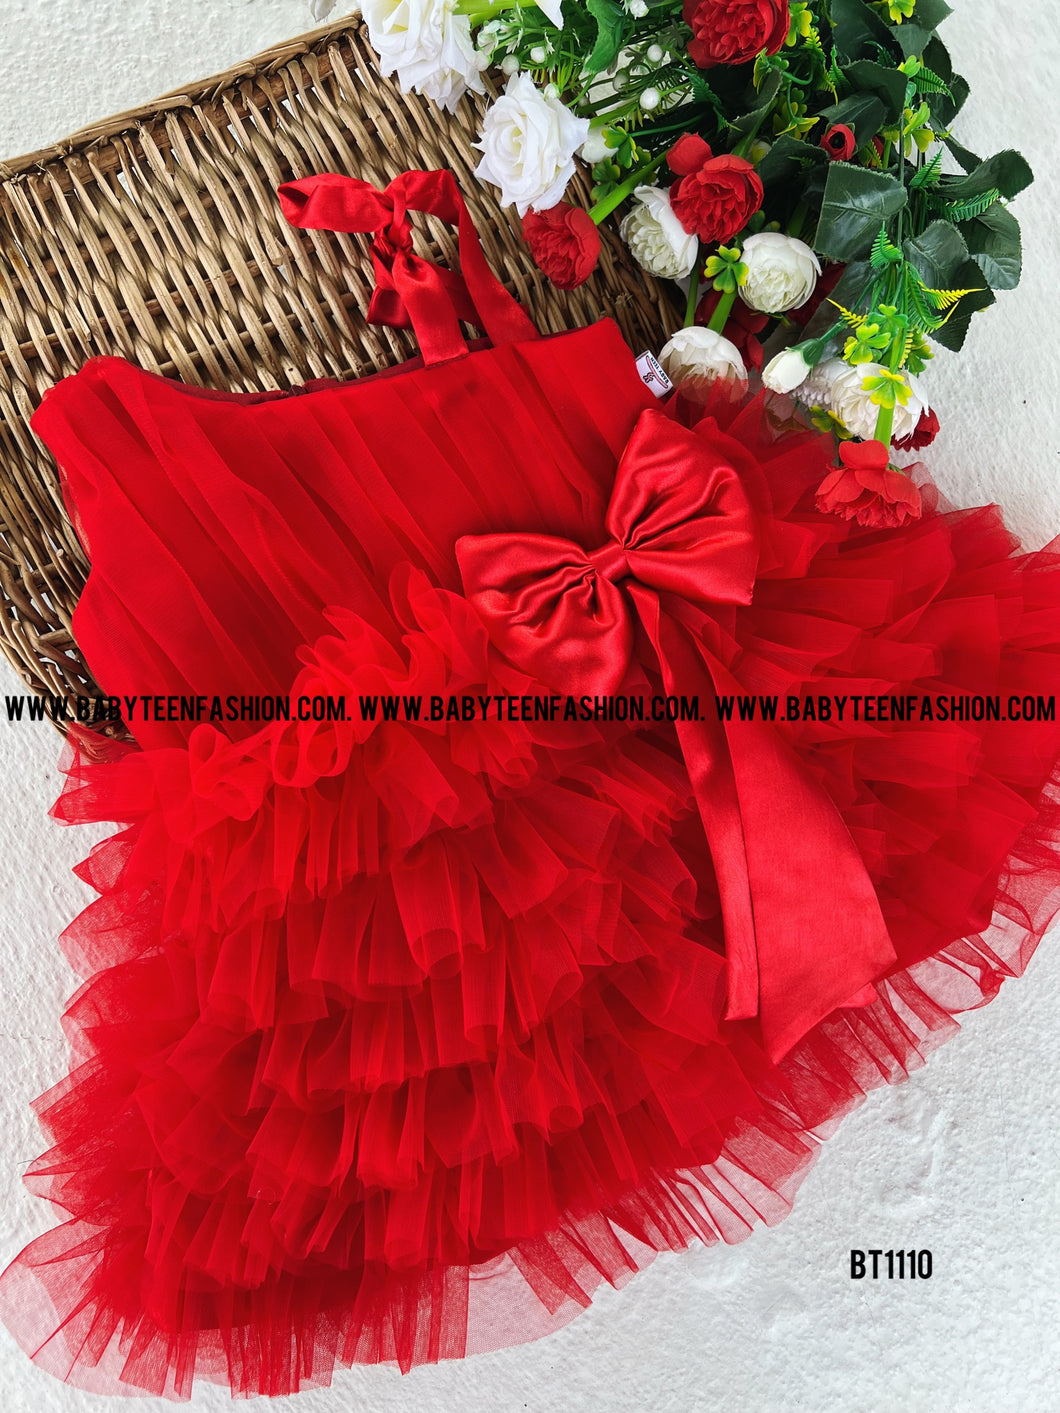 BT1110 Red Party Wear Frock For Baby and Teens